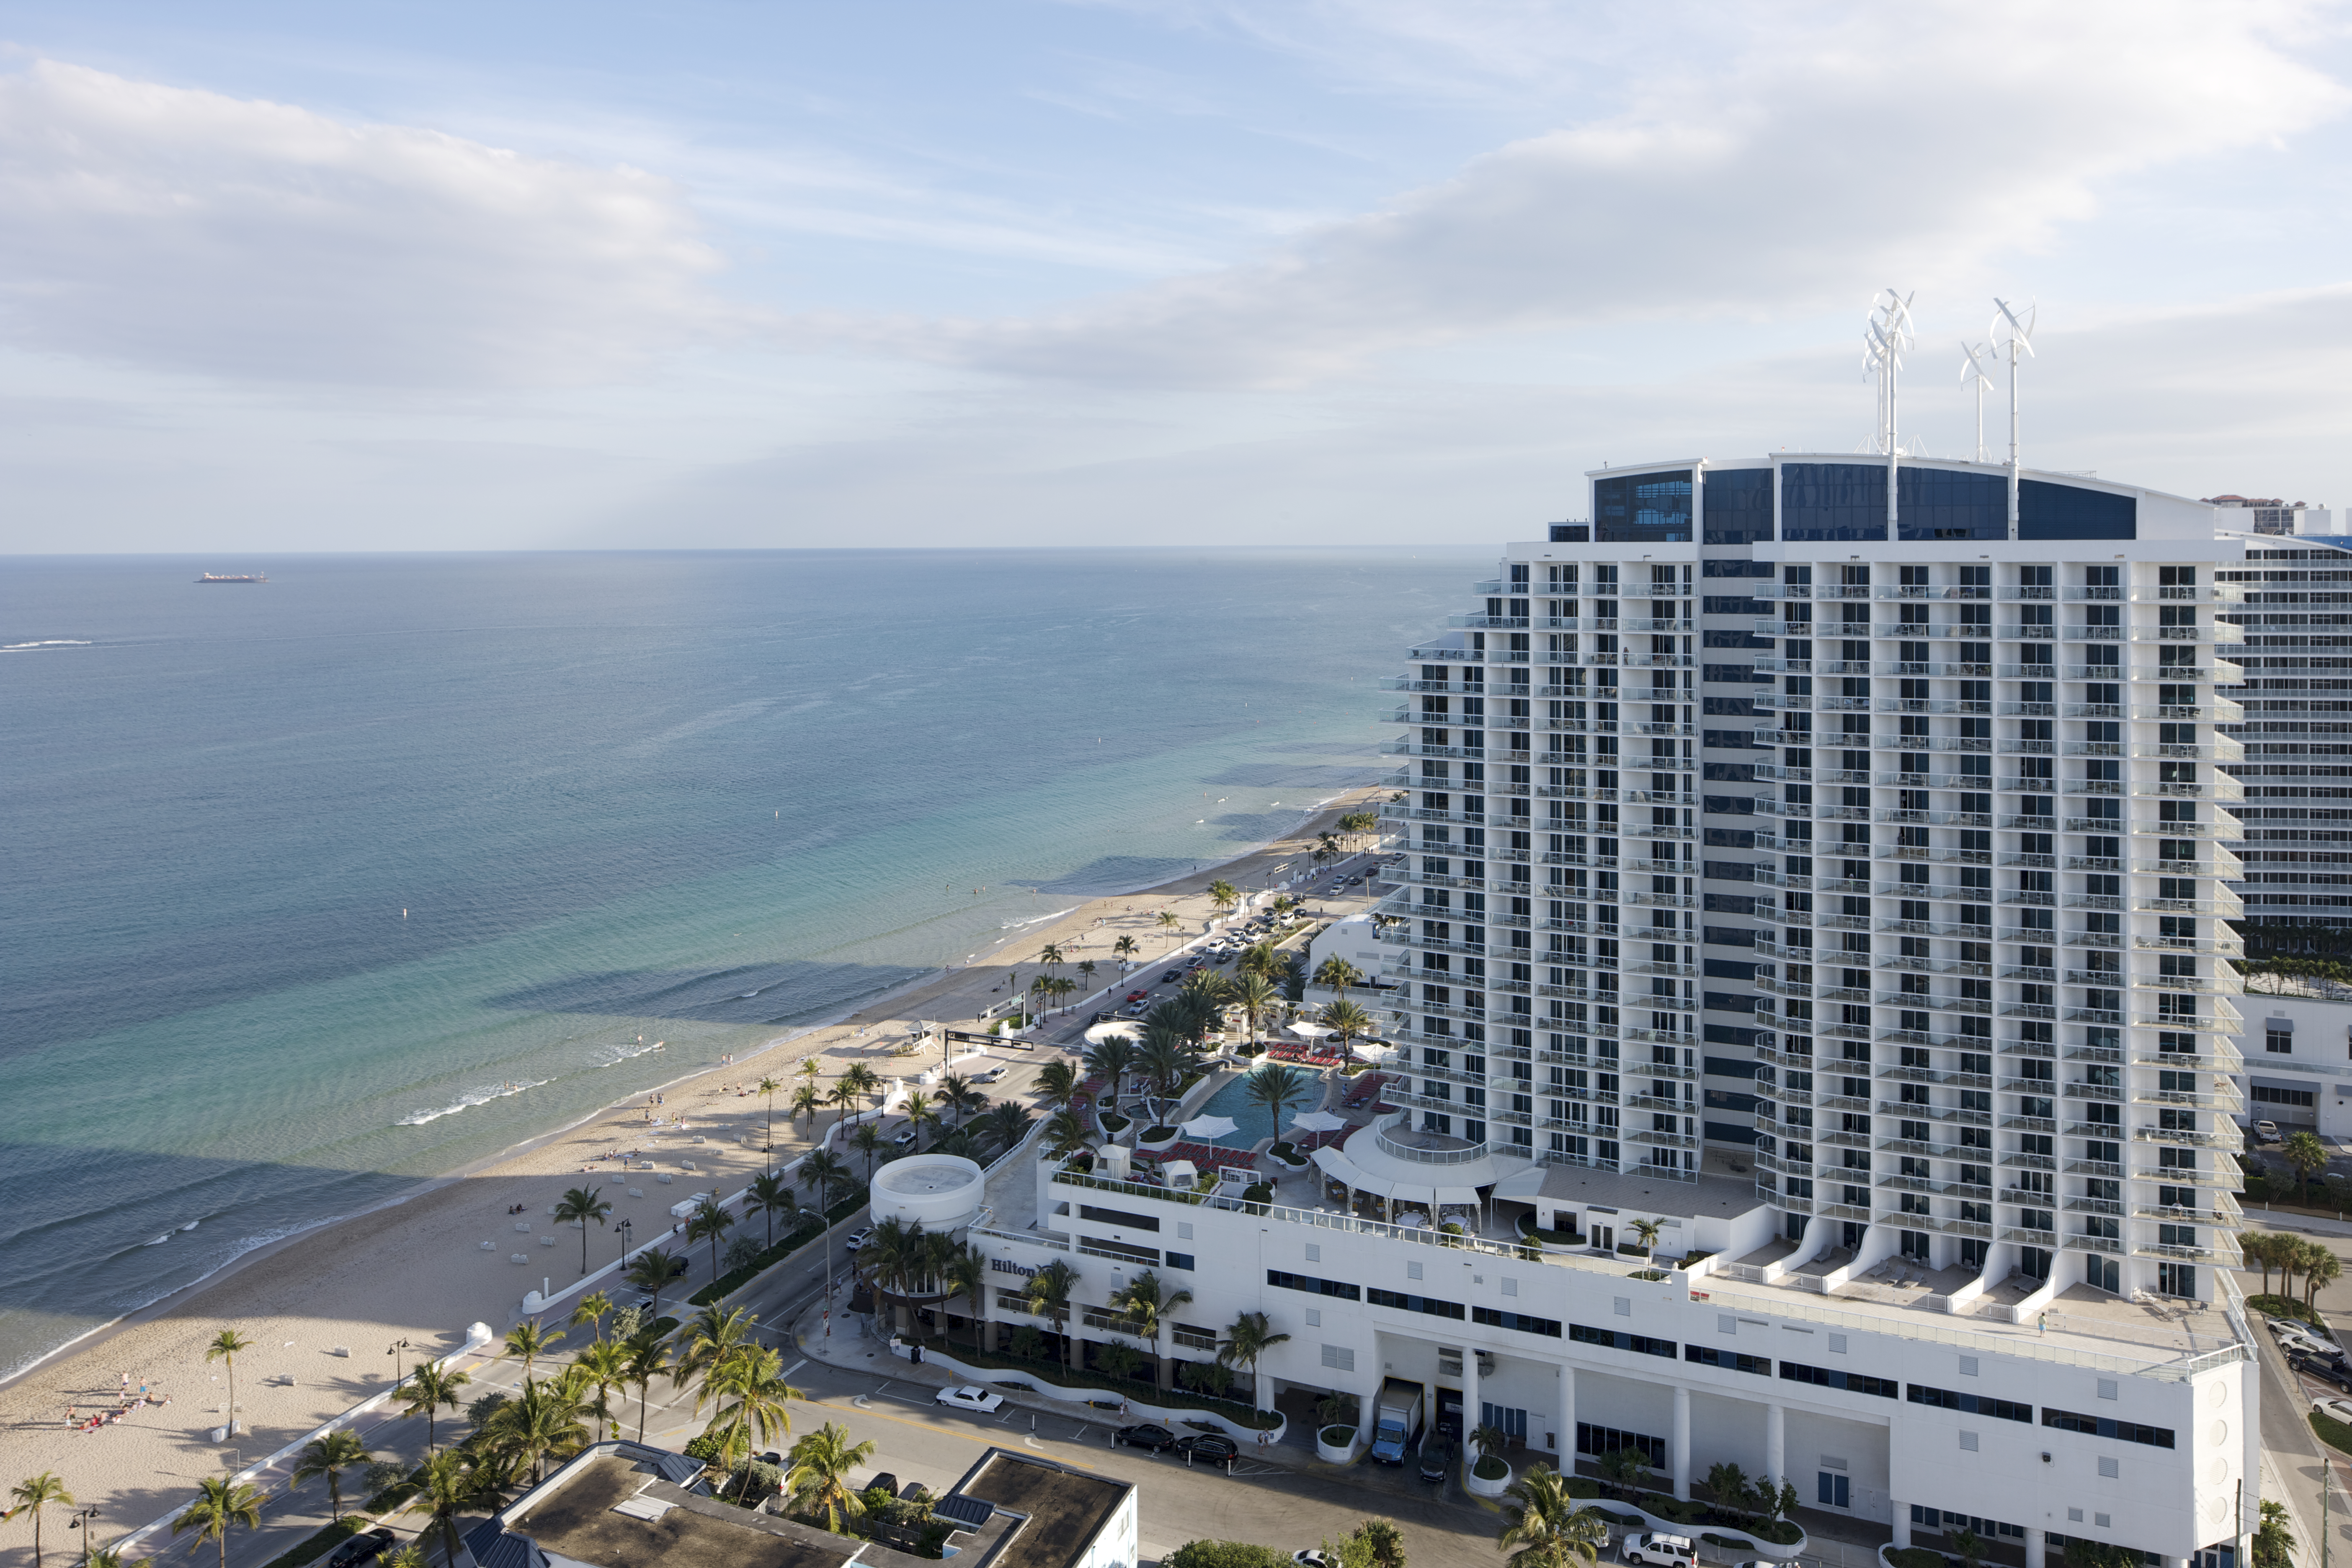 Sustainable Energy At The Hilton Beach Resort